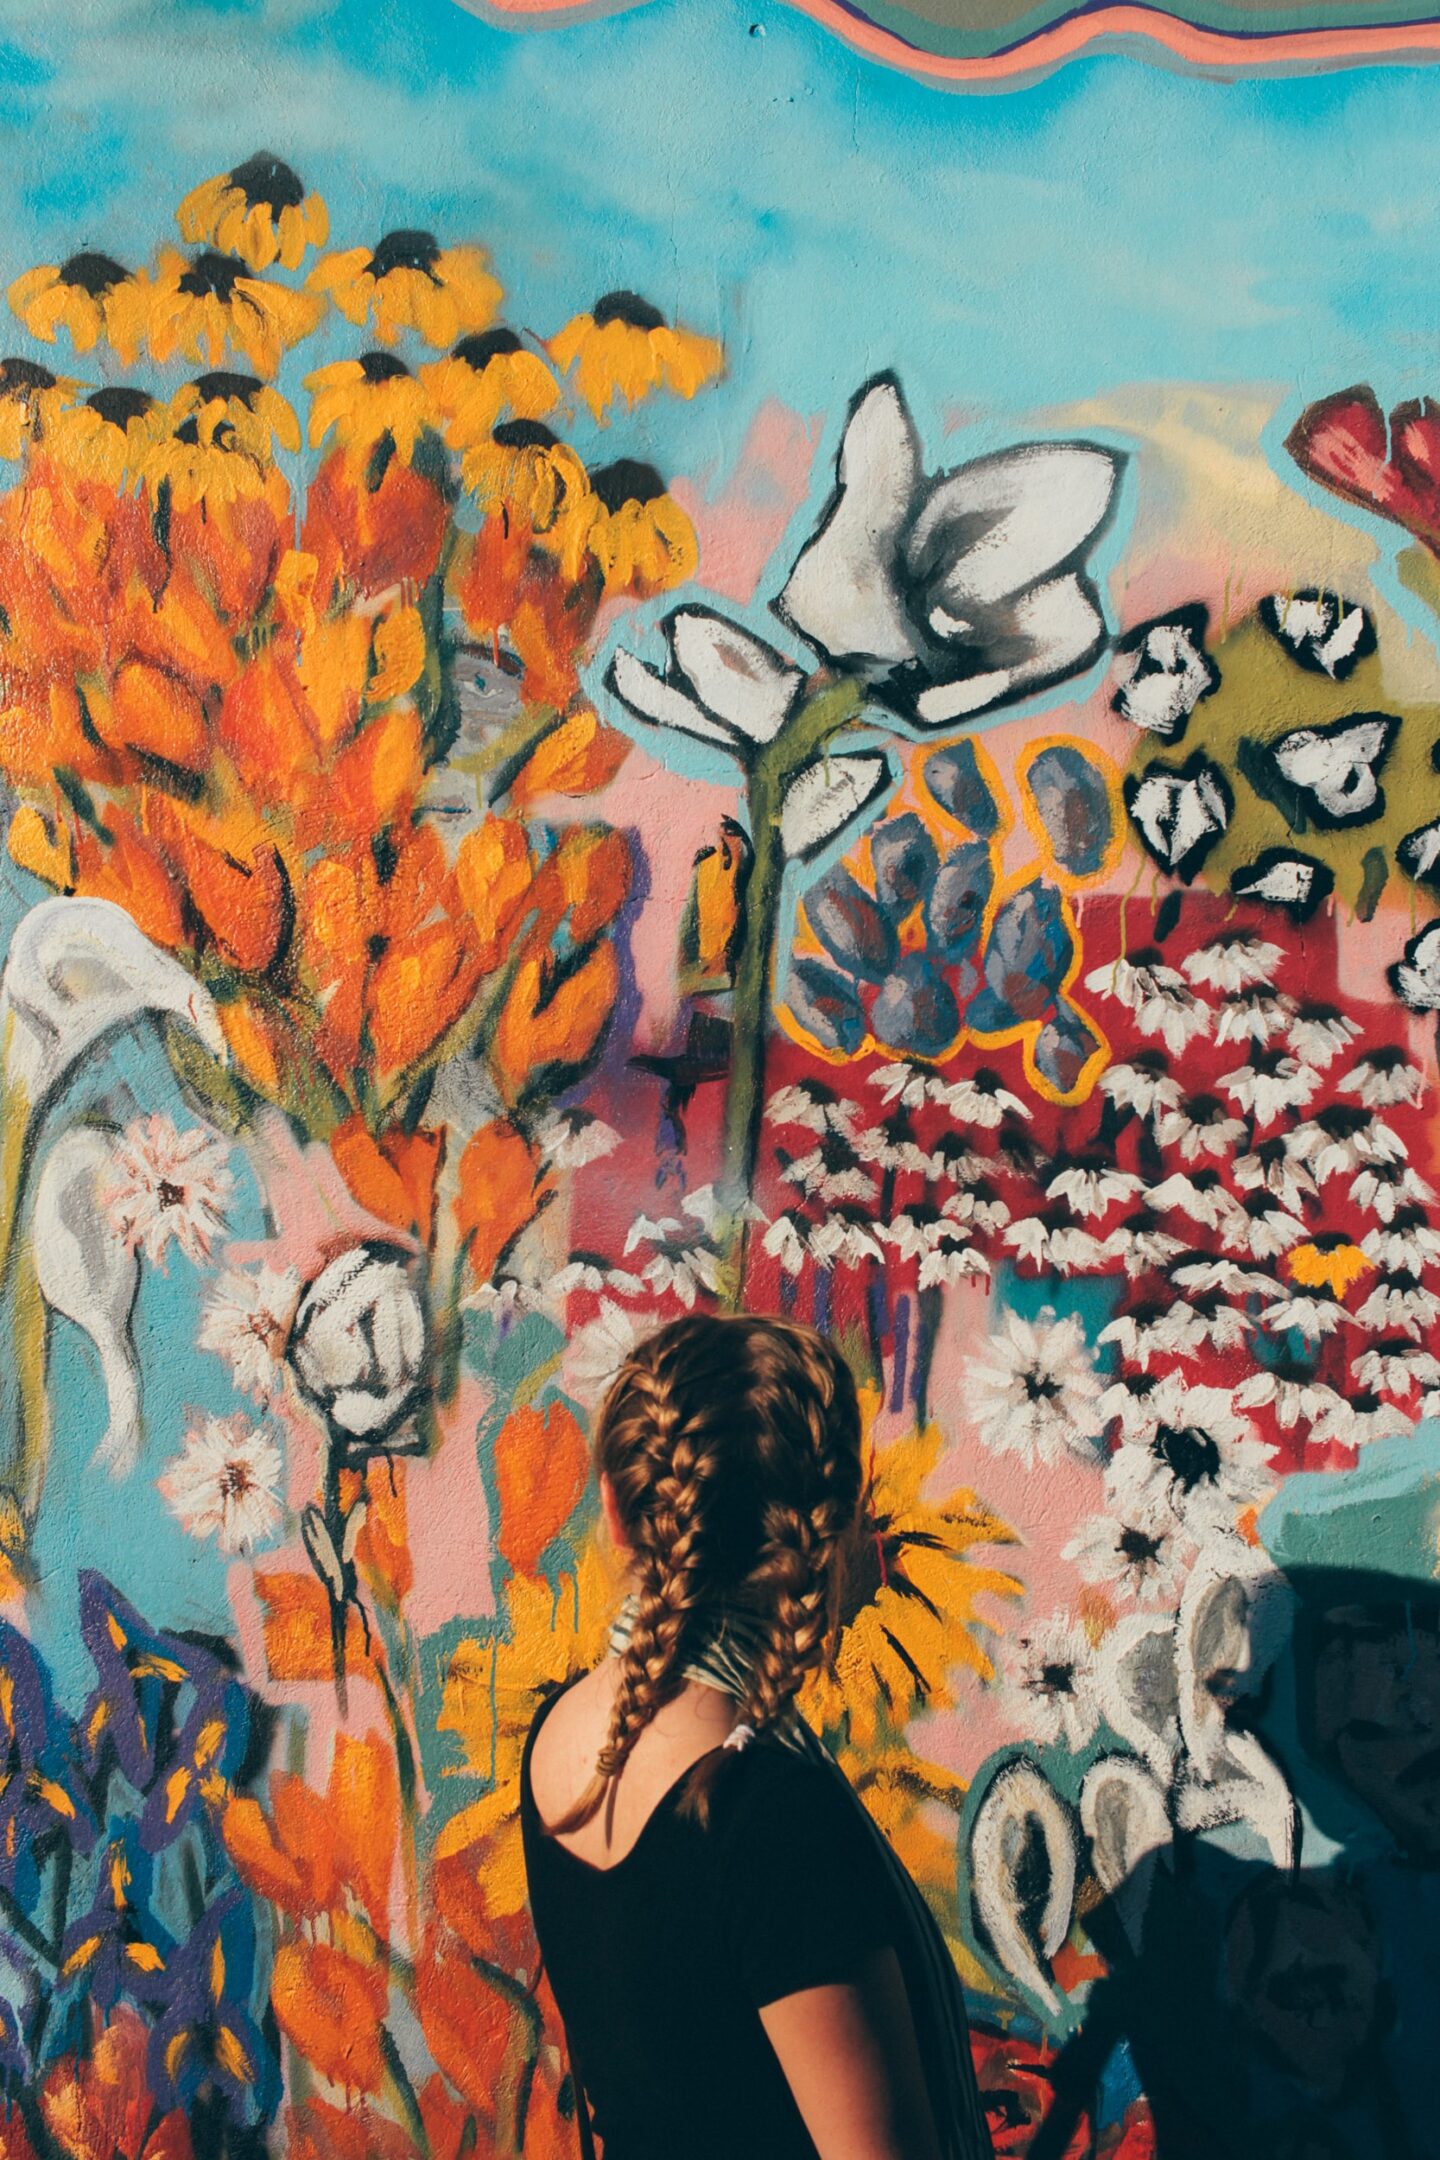 Top 10 Cheap Or Free Things To Do In Nashville, Tennessee - Explore The 12 South Neighborhood - Flower Mural